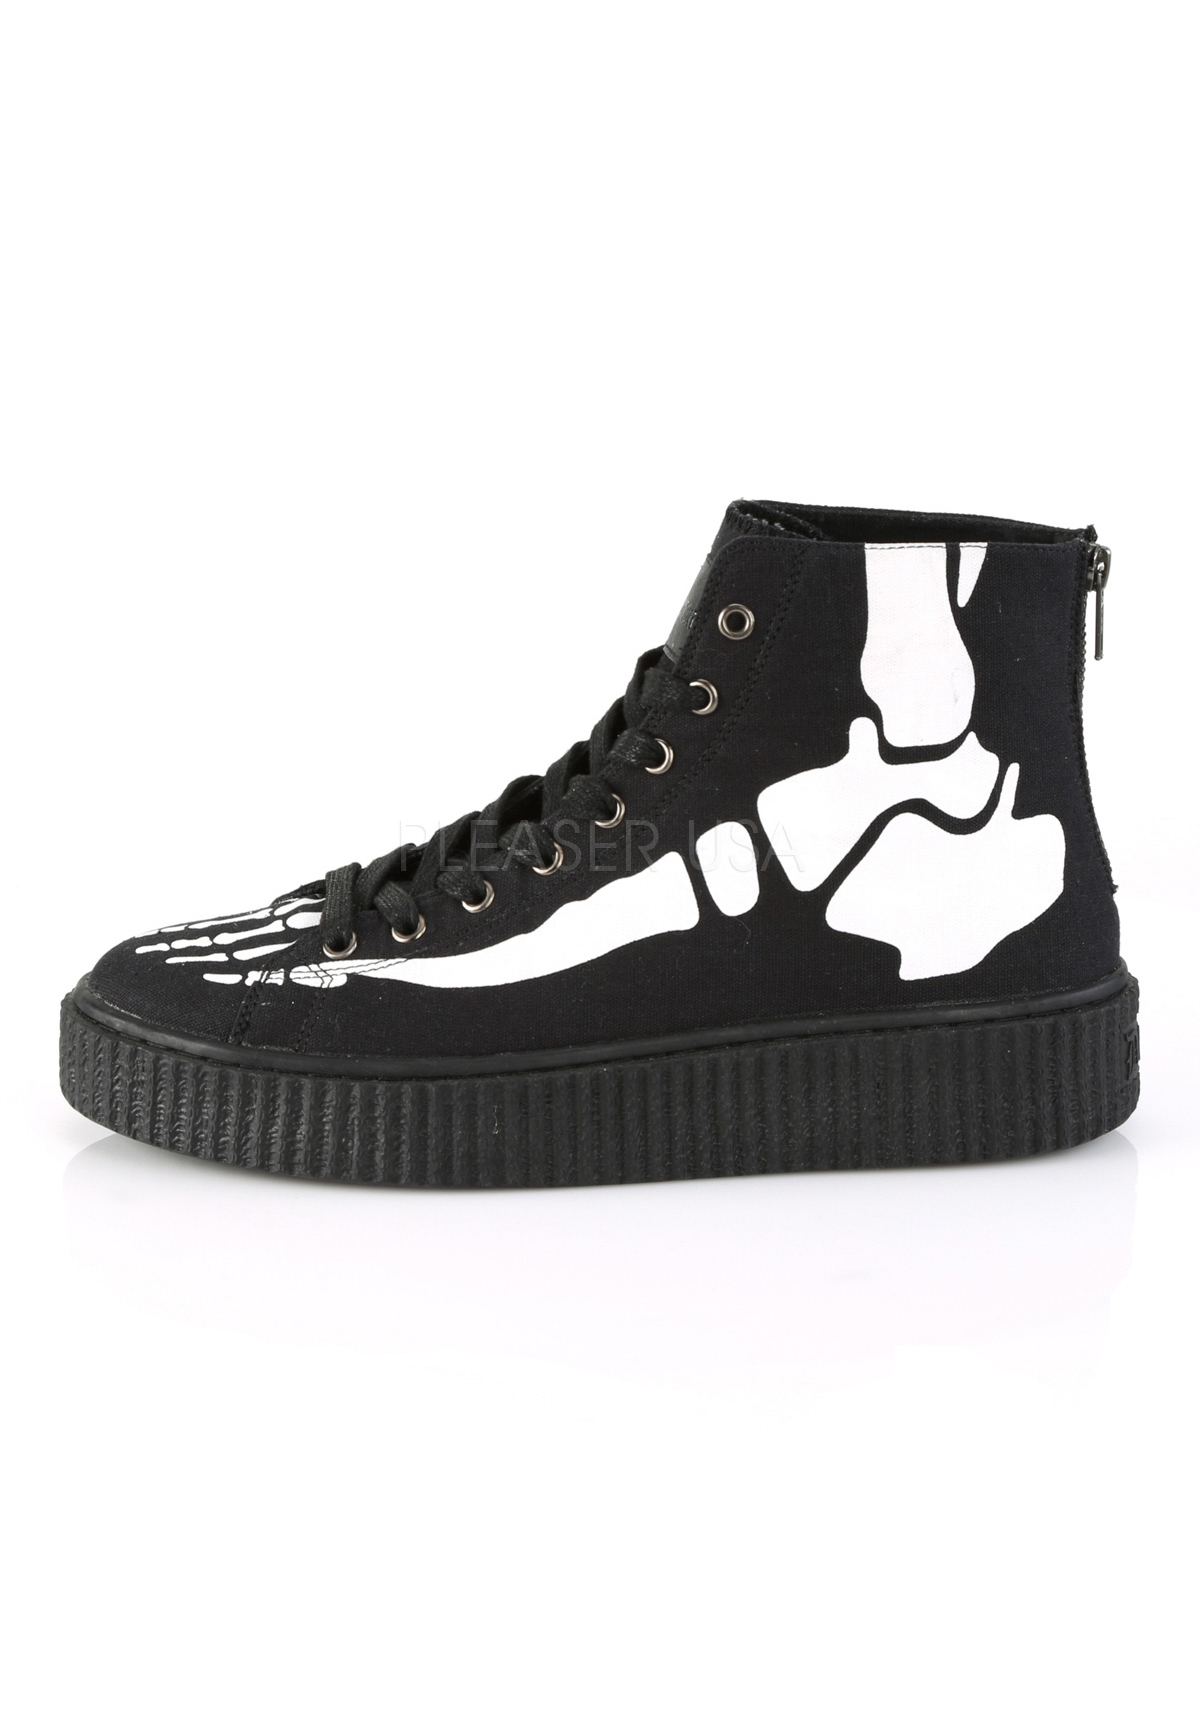 Demonia SNEEKER-201 Men's Black Canvas Round Toe Lace Up Front Creepers Sneakers